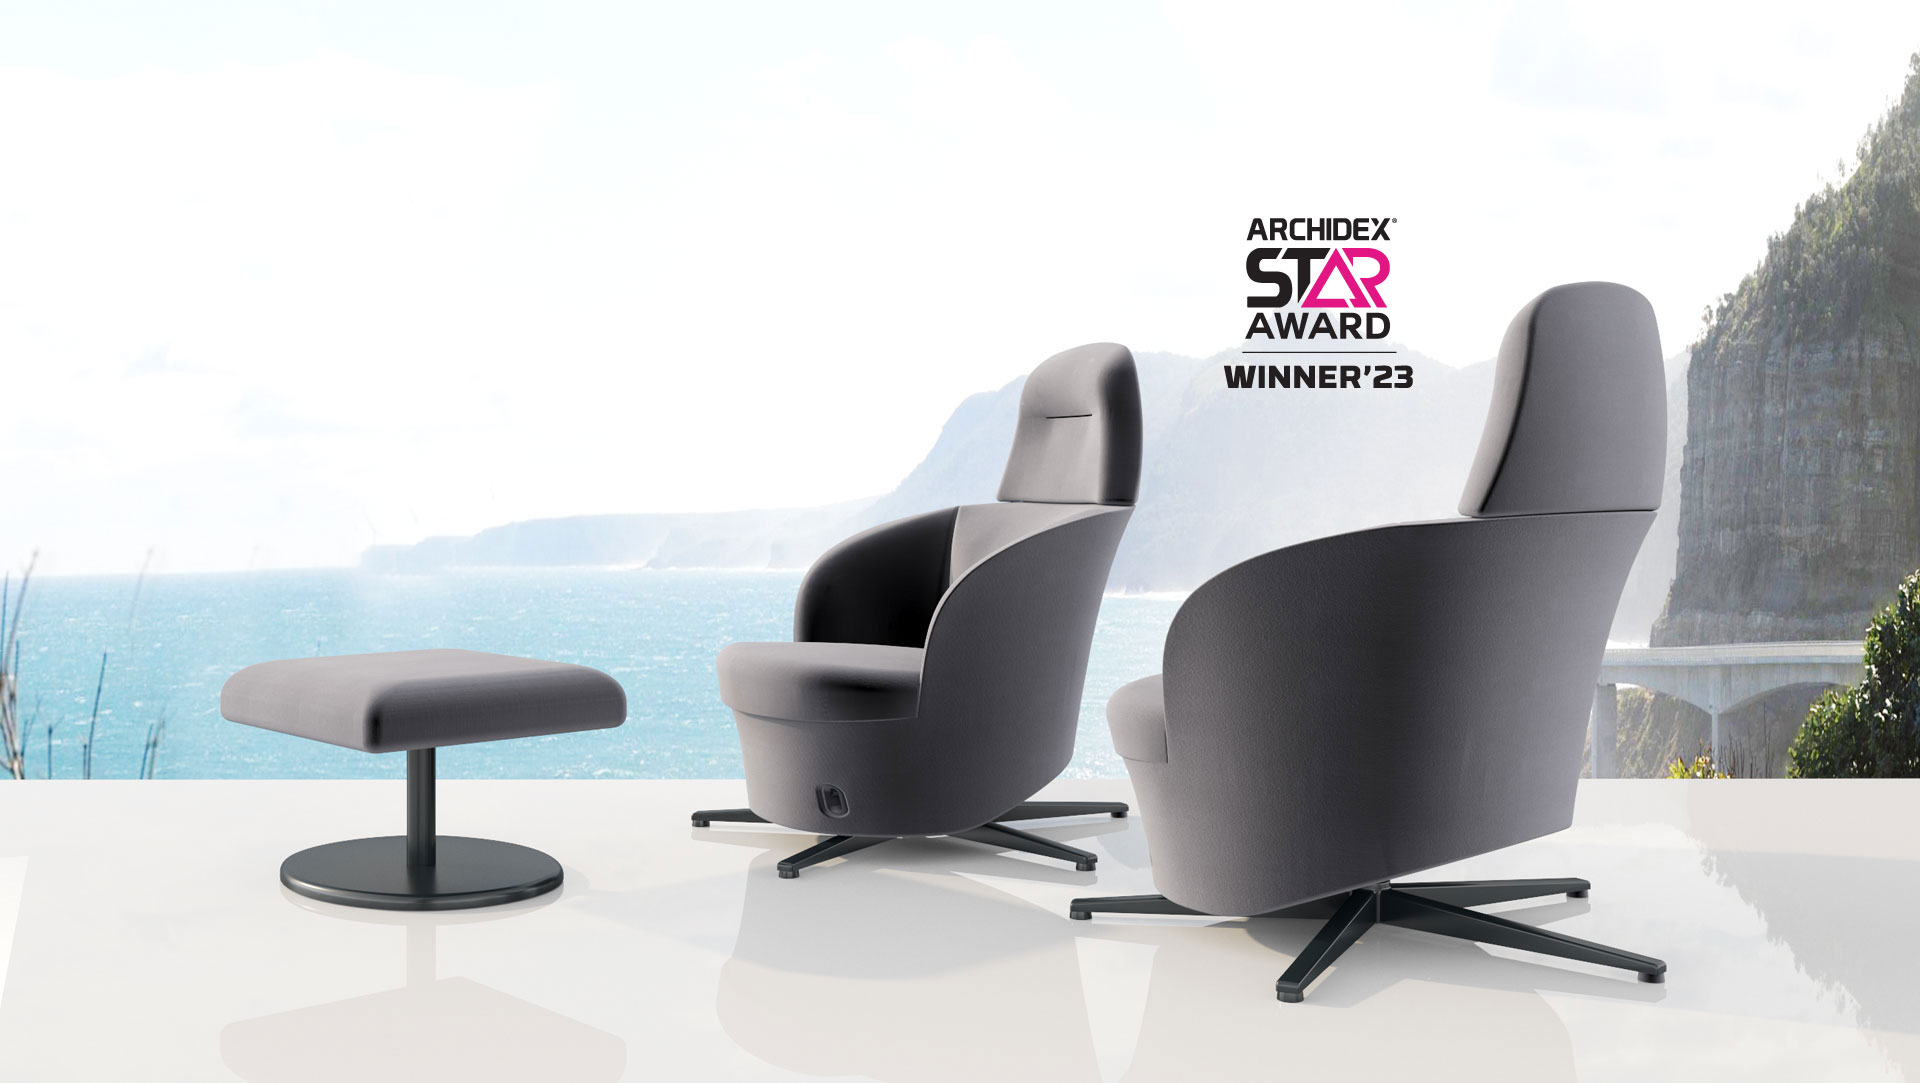 Swell armchair on a glossy floor beside the cliff overlooking the sea with the Archidex Star Award for 2023